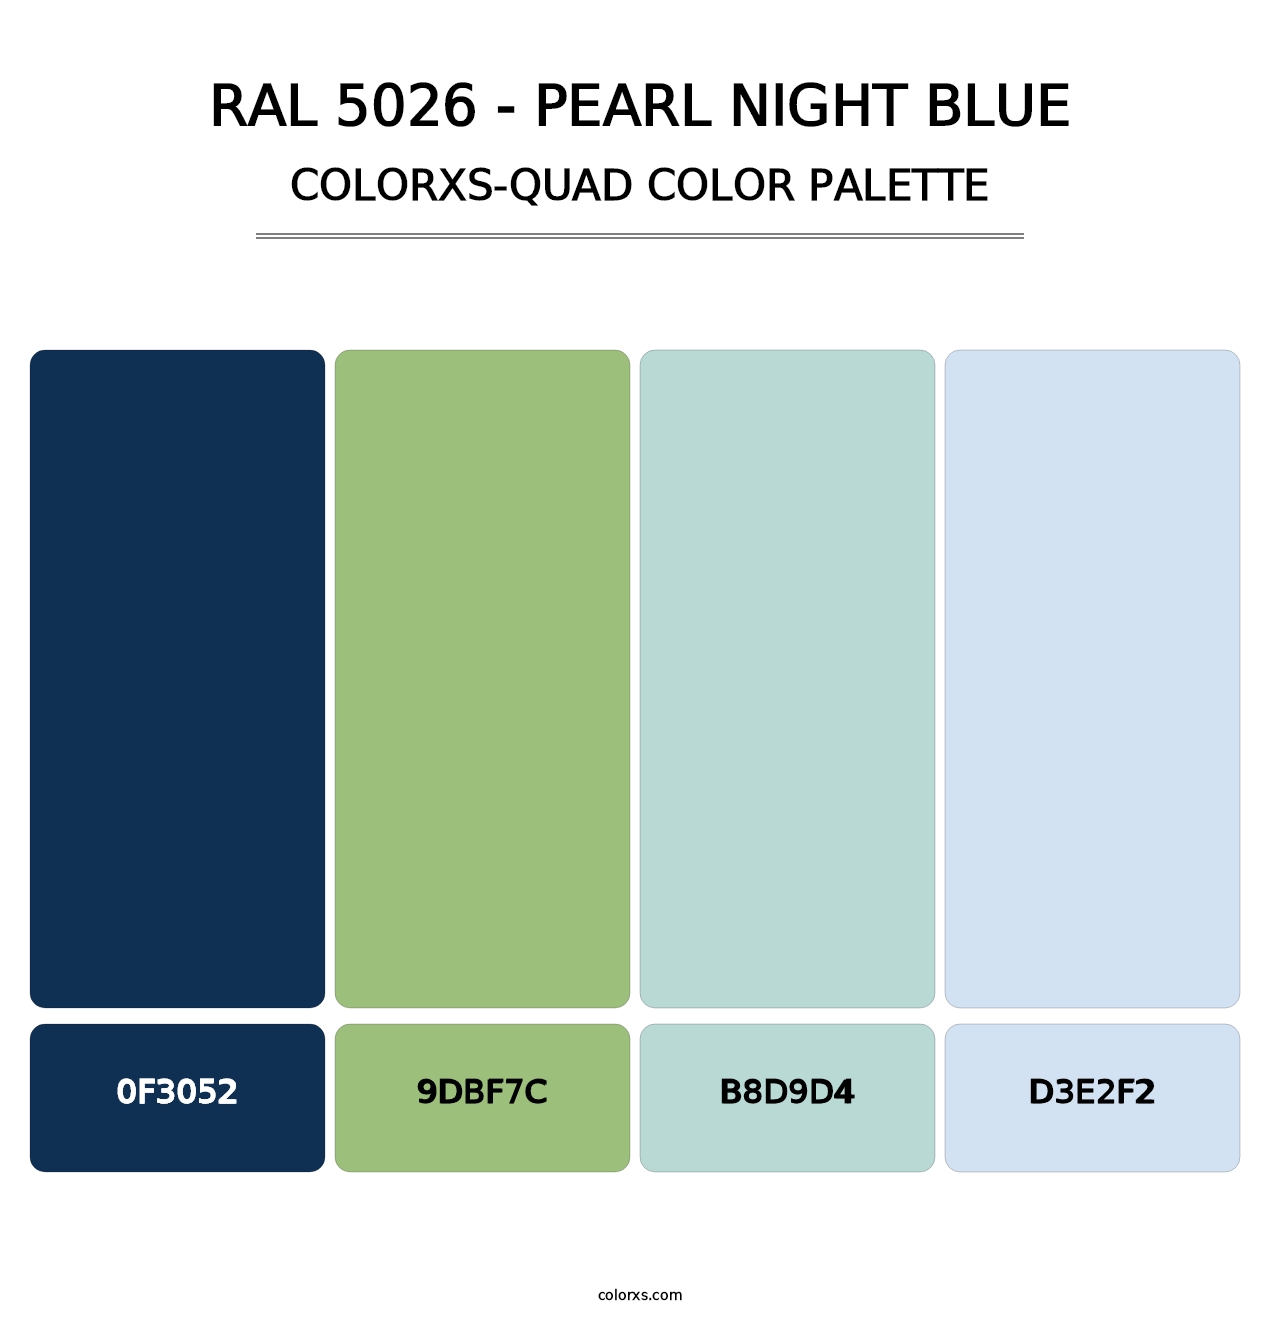 RAL 5026 - Pearl Night Blue - Colorxs Quad Palette